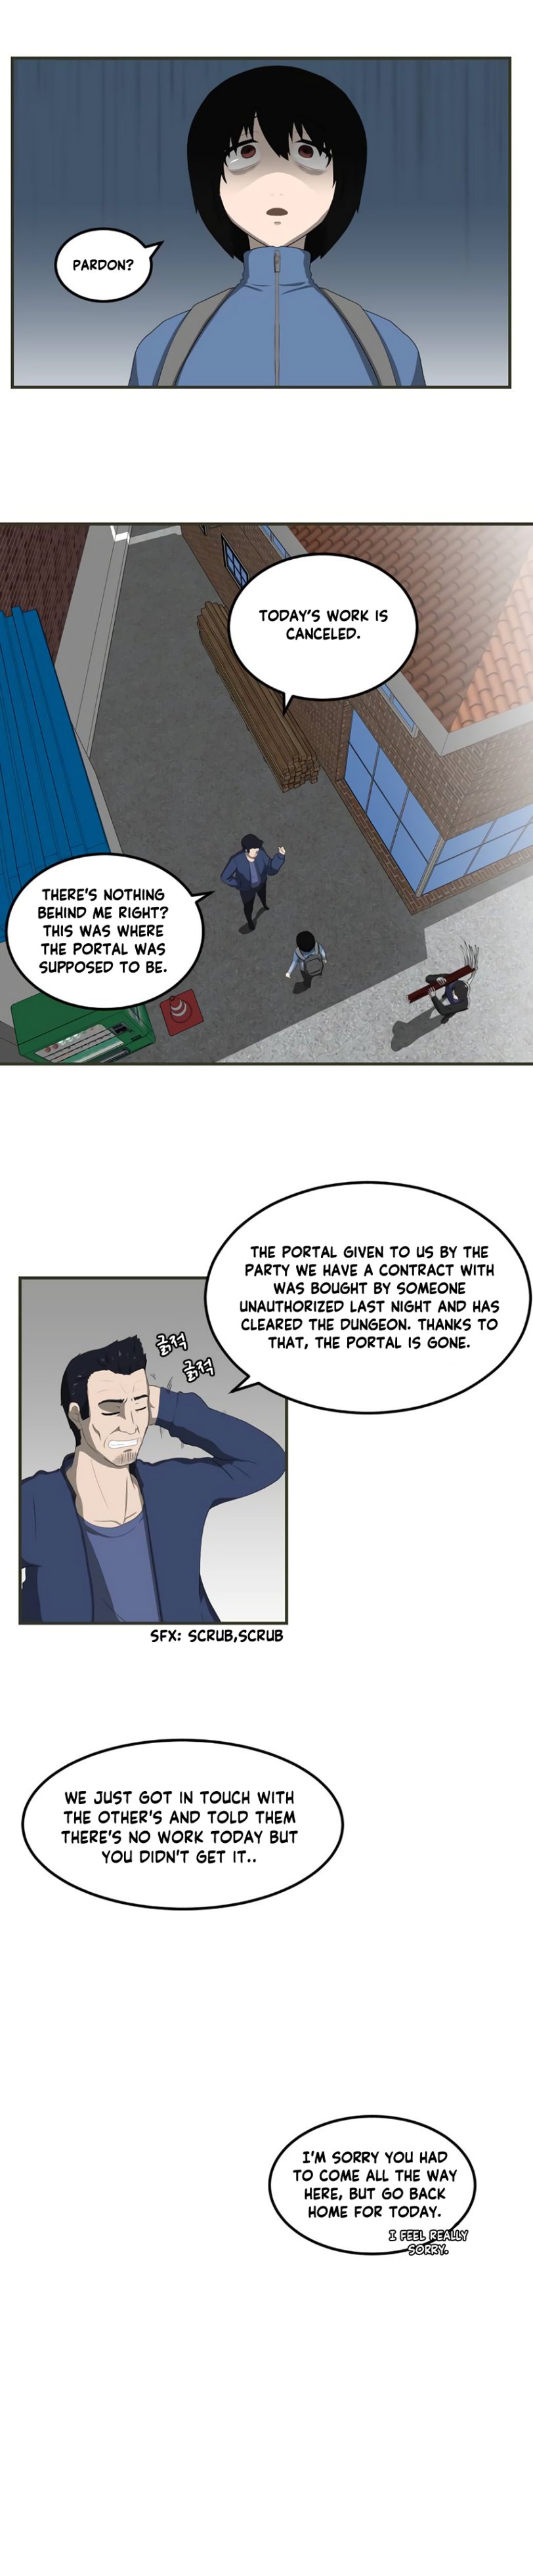 The Story of Bones and Ashes - Chapter 1 Page 9